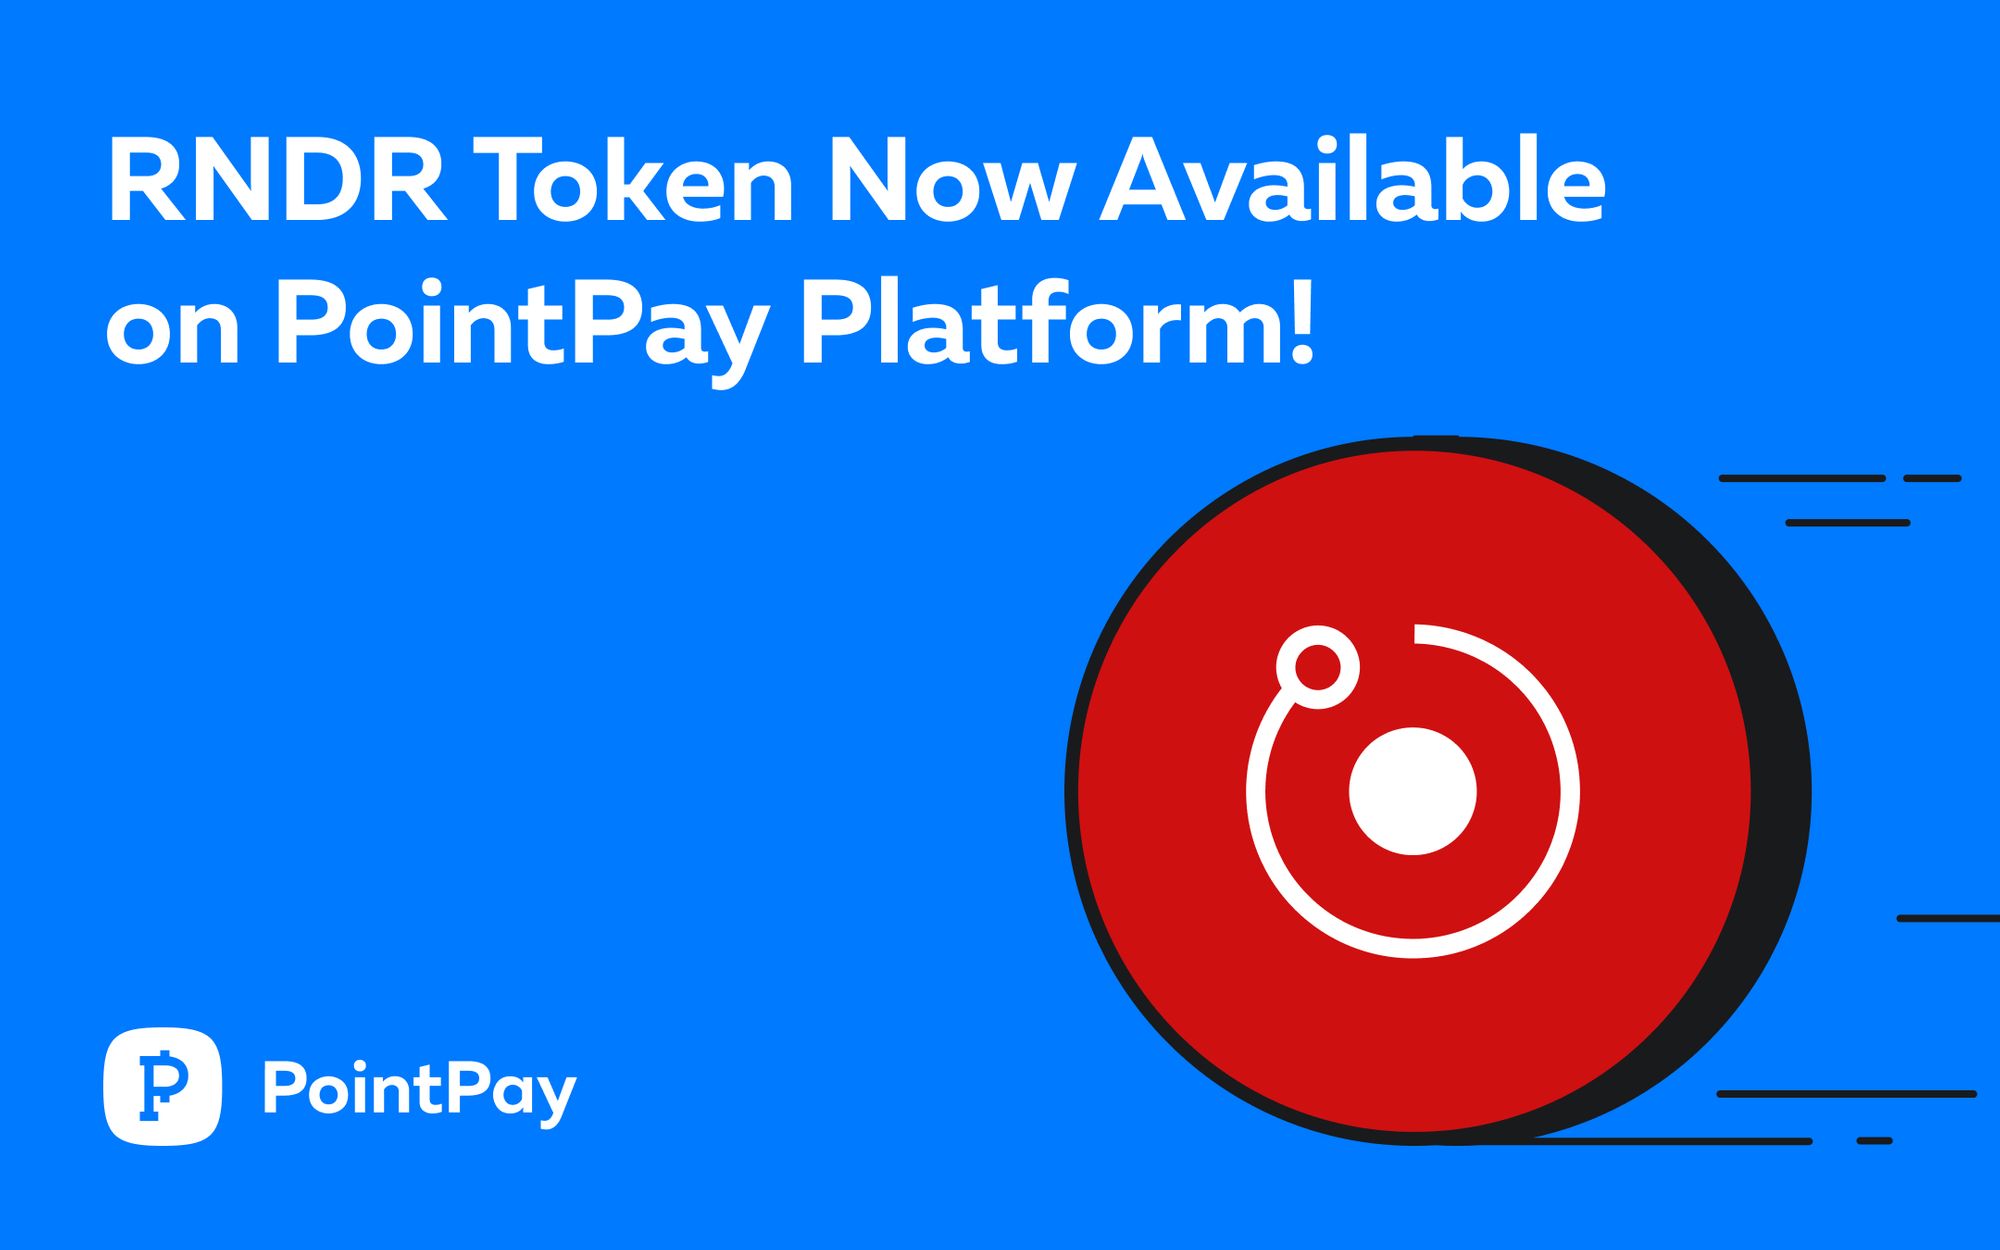 RNDR Token Now Available on PointPay Platform!